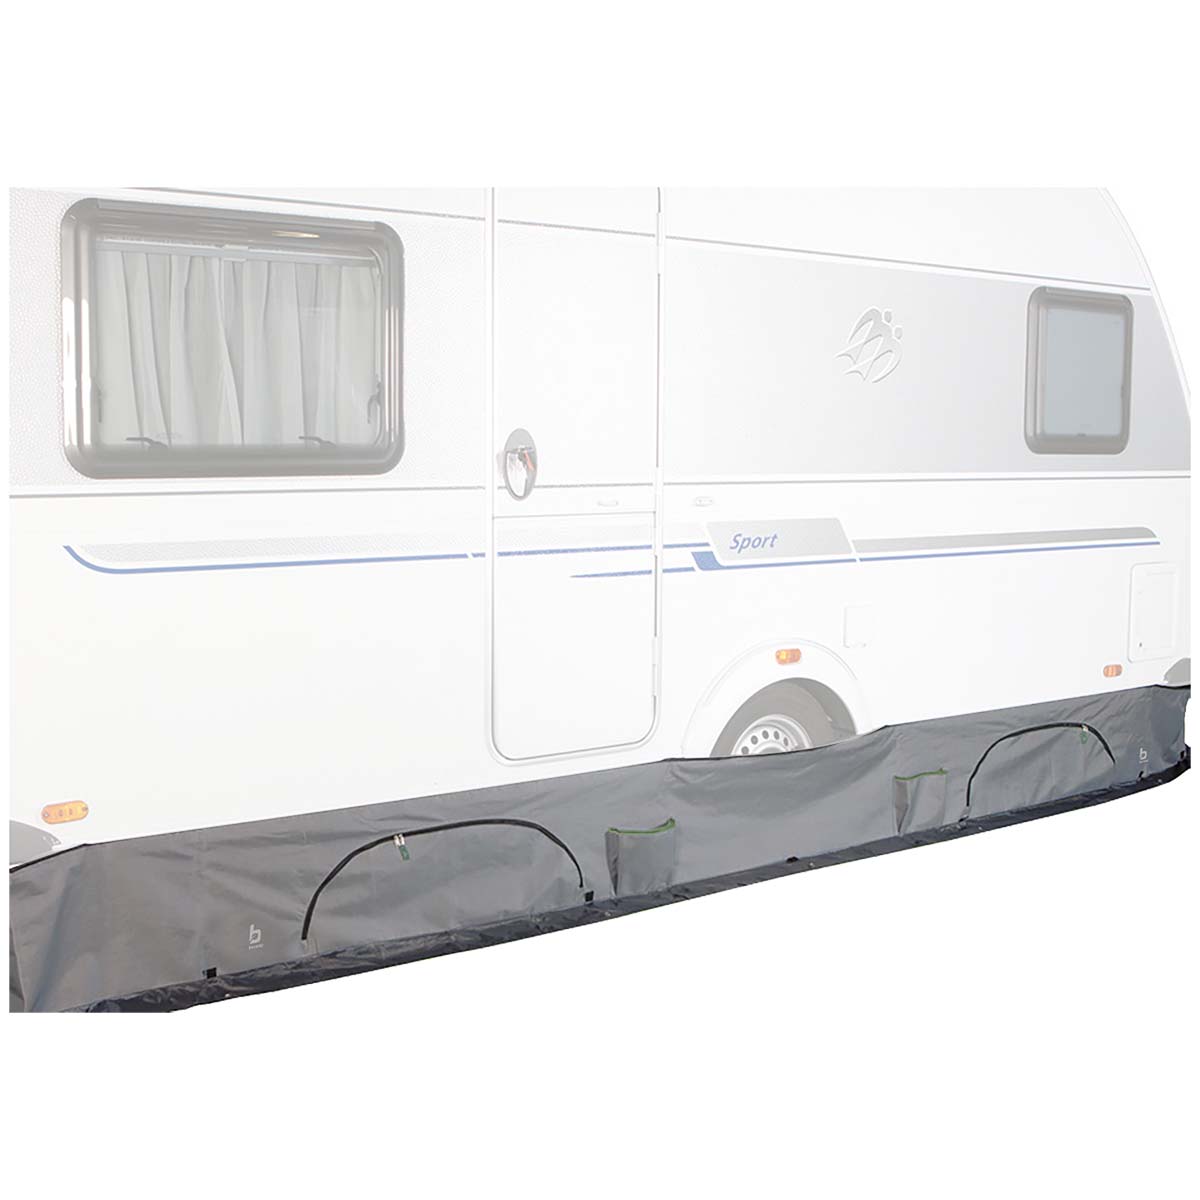 4117740 Draft strip with a string for the caravan. This draught strip has two mesh storage compartments and two large storage bags which are lockable with a zipper. The draught strip has eyelets and loops through which the draught strip can be properly tensioned under all caravans. Suitable for all caravans between 4 and 6 meters because the draught strip can easily be folded out from 4 meters, per 0.5 meters, to 6 meters. The height is 52 centimetres of which 14 centimetres is waterproof 190T polyester with a PU coating (water column: 1500 mm). The other fabric is the luxury 300 denier PVC coated polyester.